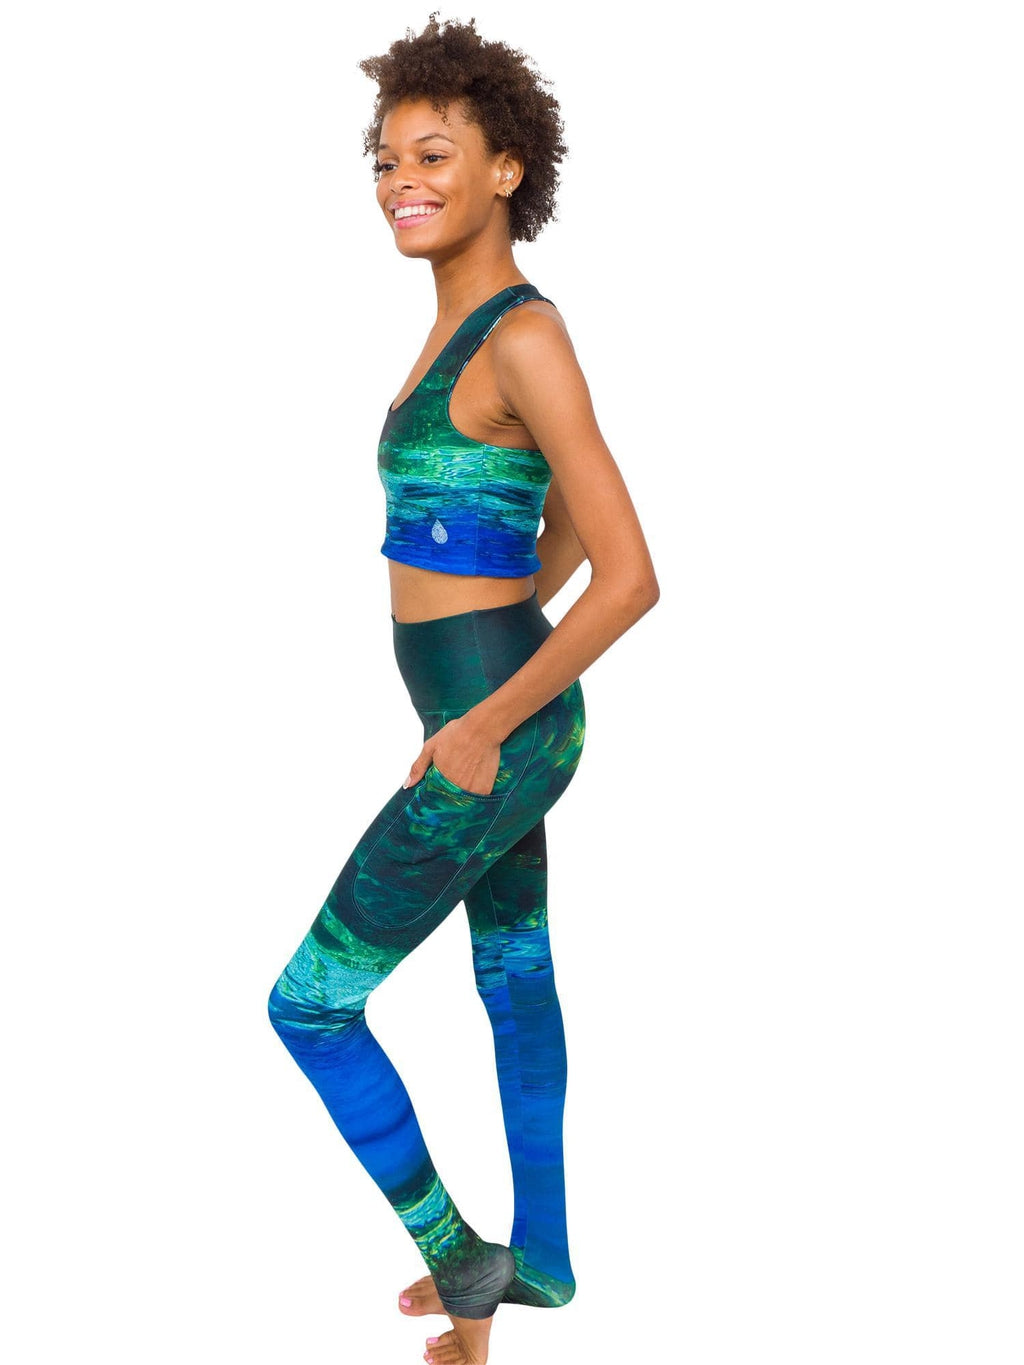 Model: Syriah is a sea turtle conservation biologist. She is 5&#39;7&quot;, 111 lbs and is wearing a size S top and XS legging.